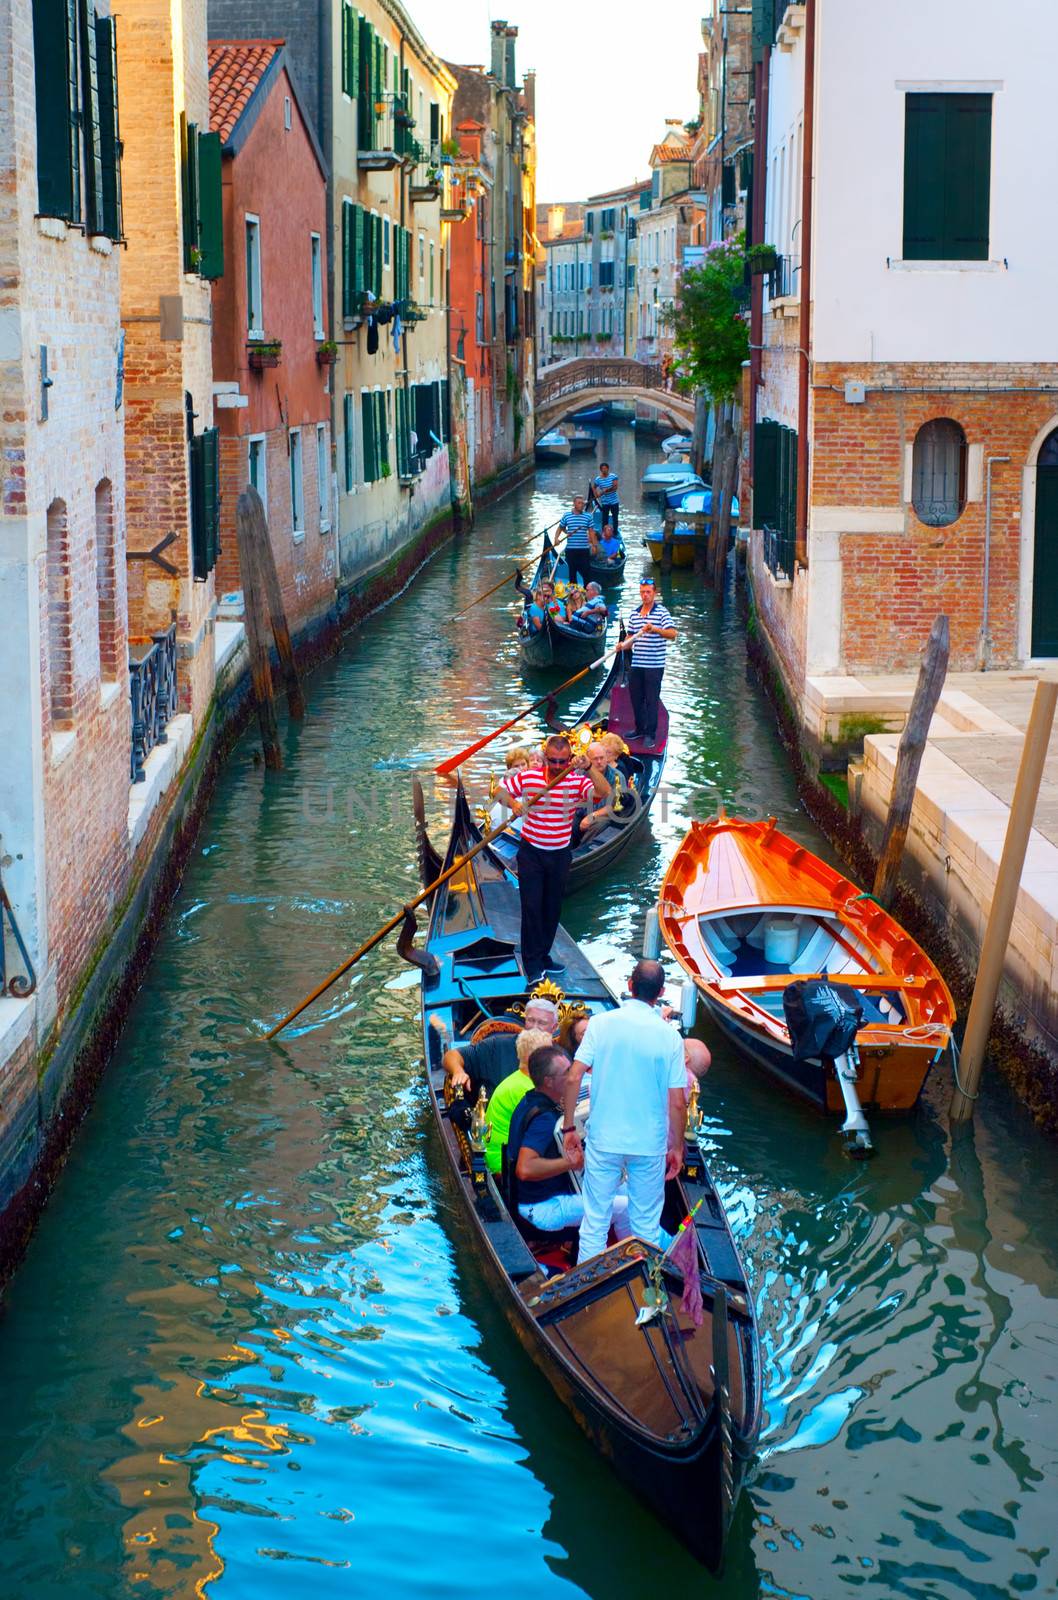 Venice, Italy - September 6, 2013 :  Gondolas with tourists cruising a small Venetian canal. More than 20 million tourists come to Venice annually.